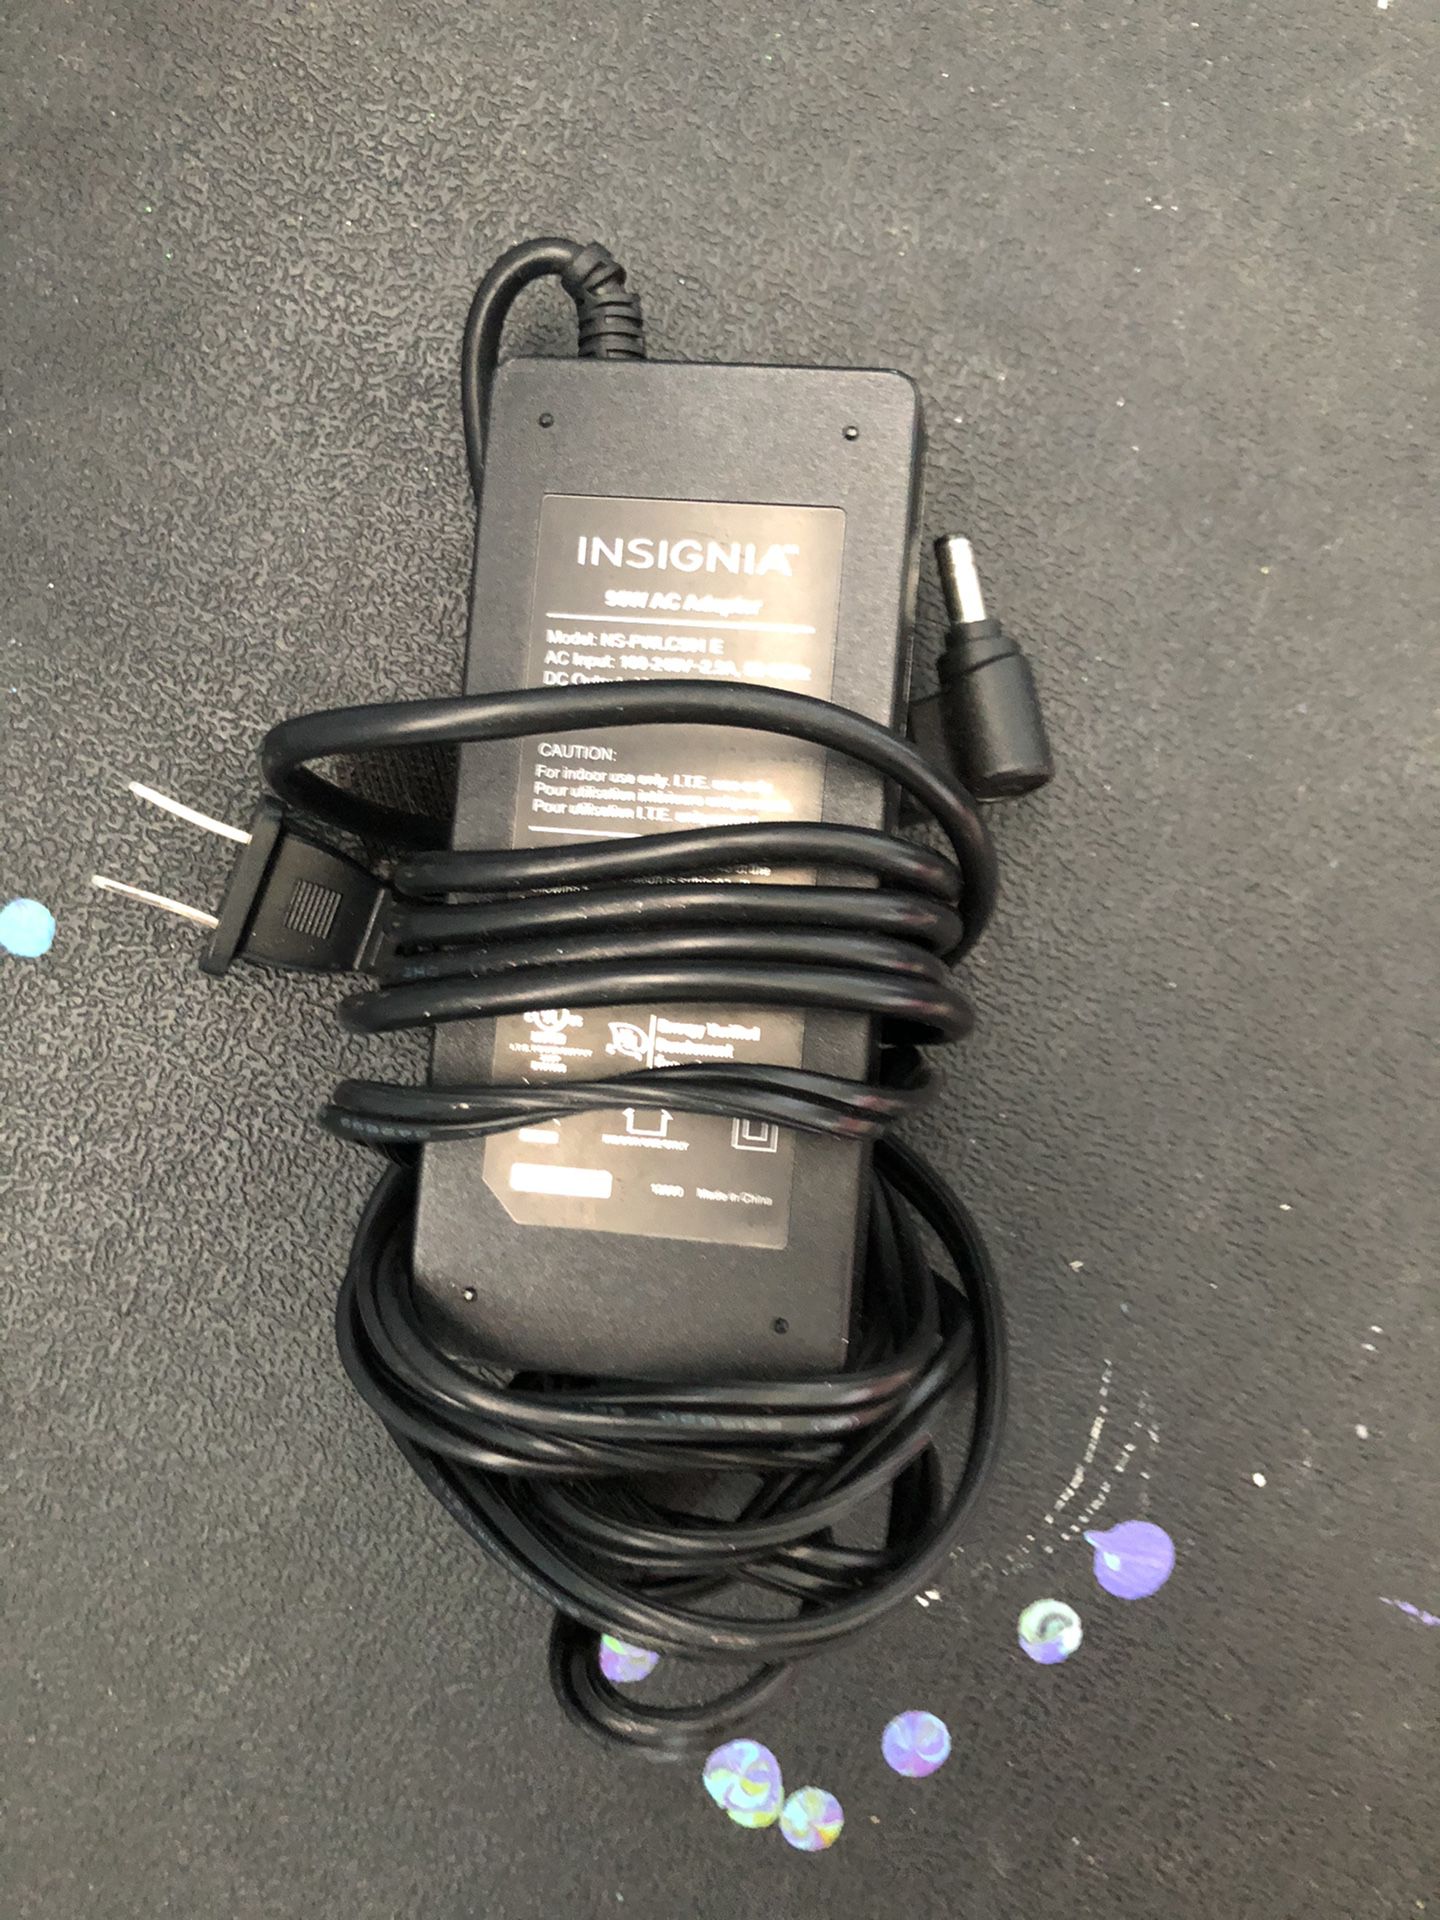 Insignia Laptop Charger